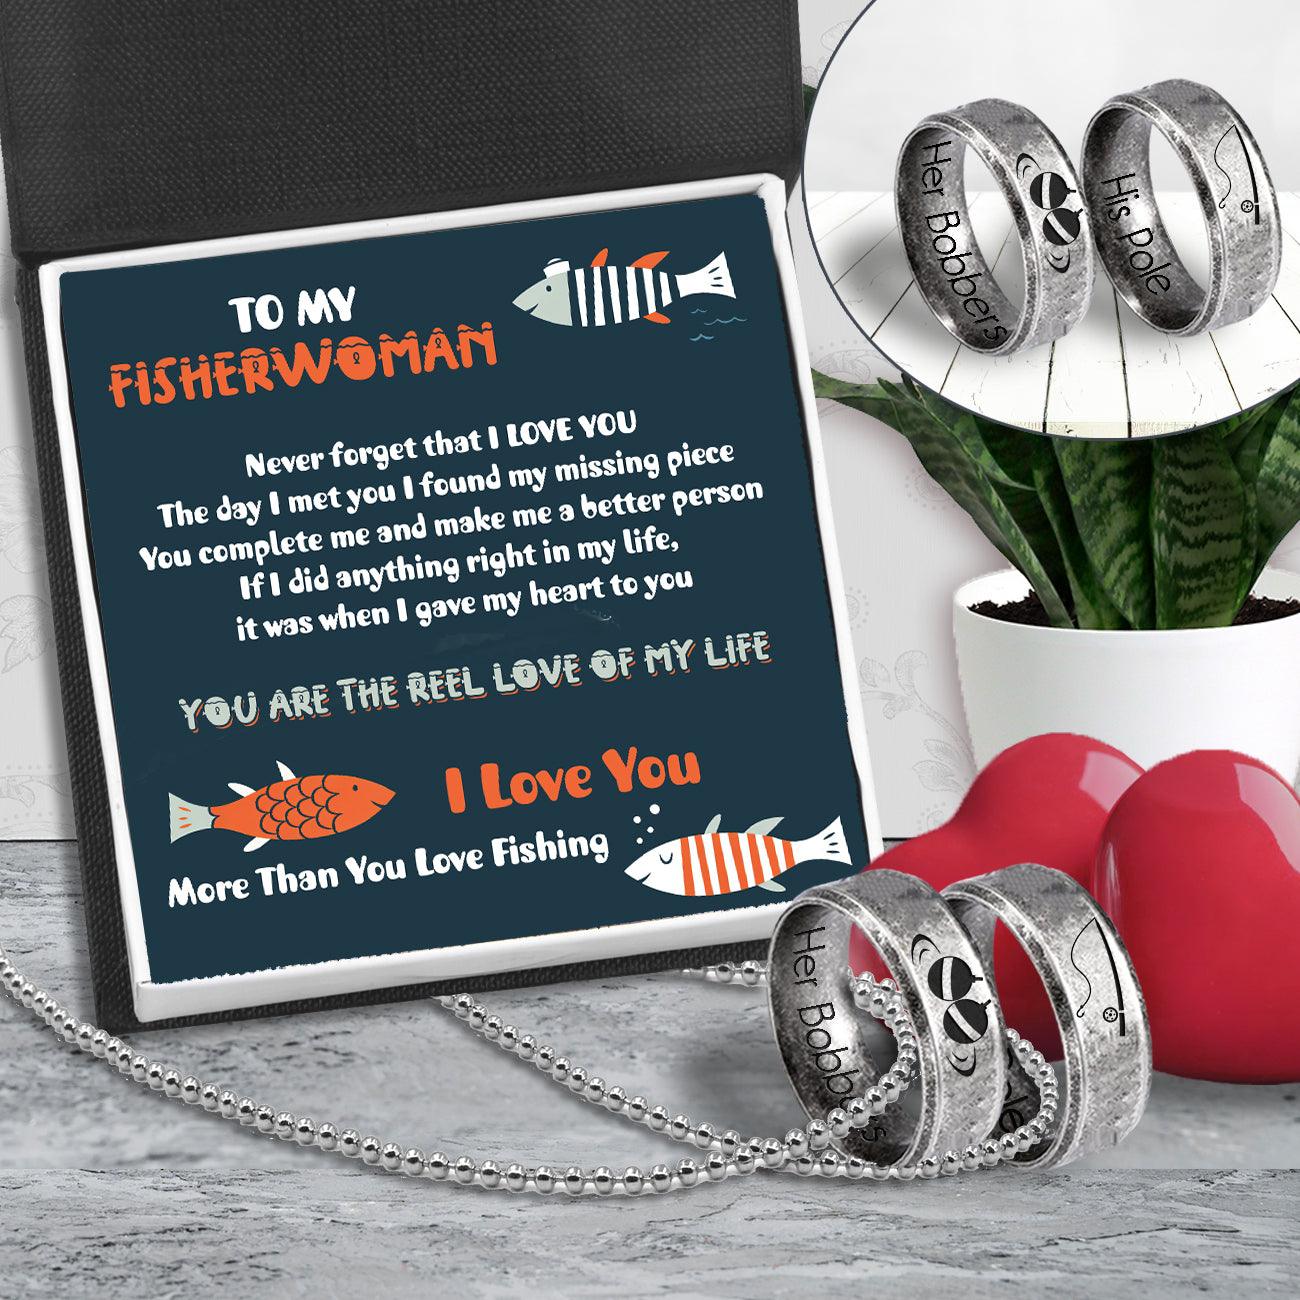 Fishing Ring Couple Necklaces - Fishing - To My Fisherwoman - I Love You More Than You Love Fishing - Augndx13008 - Gifts Holder